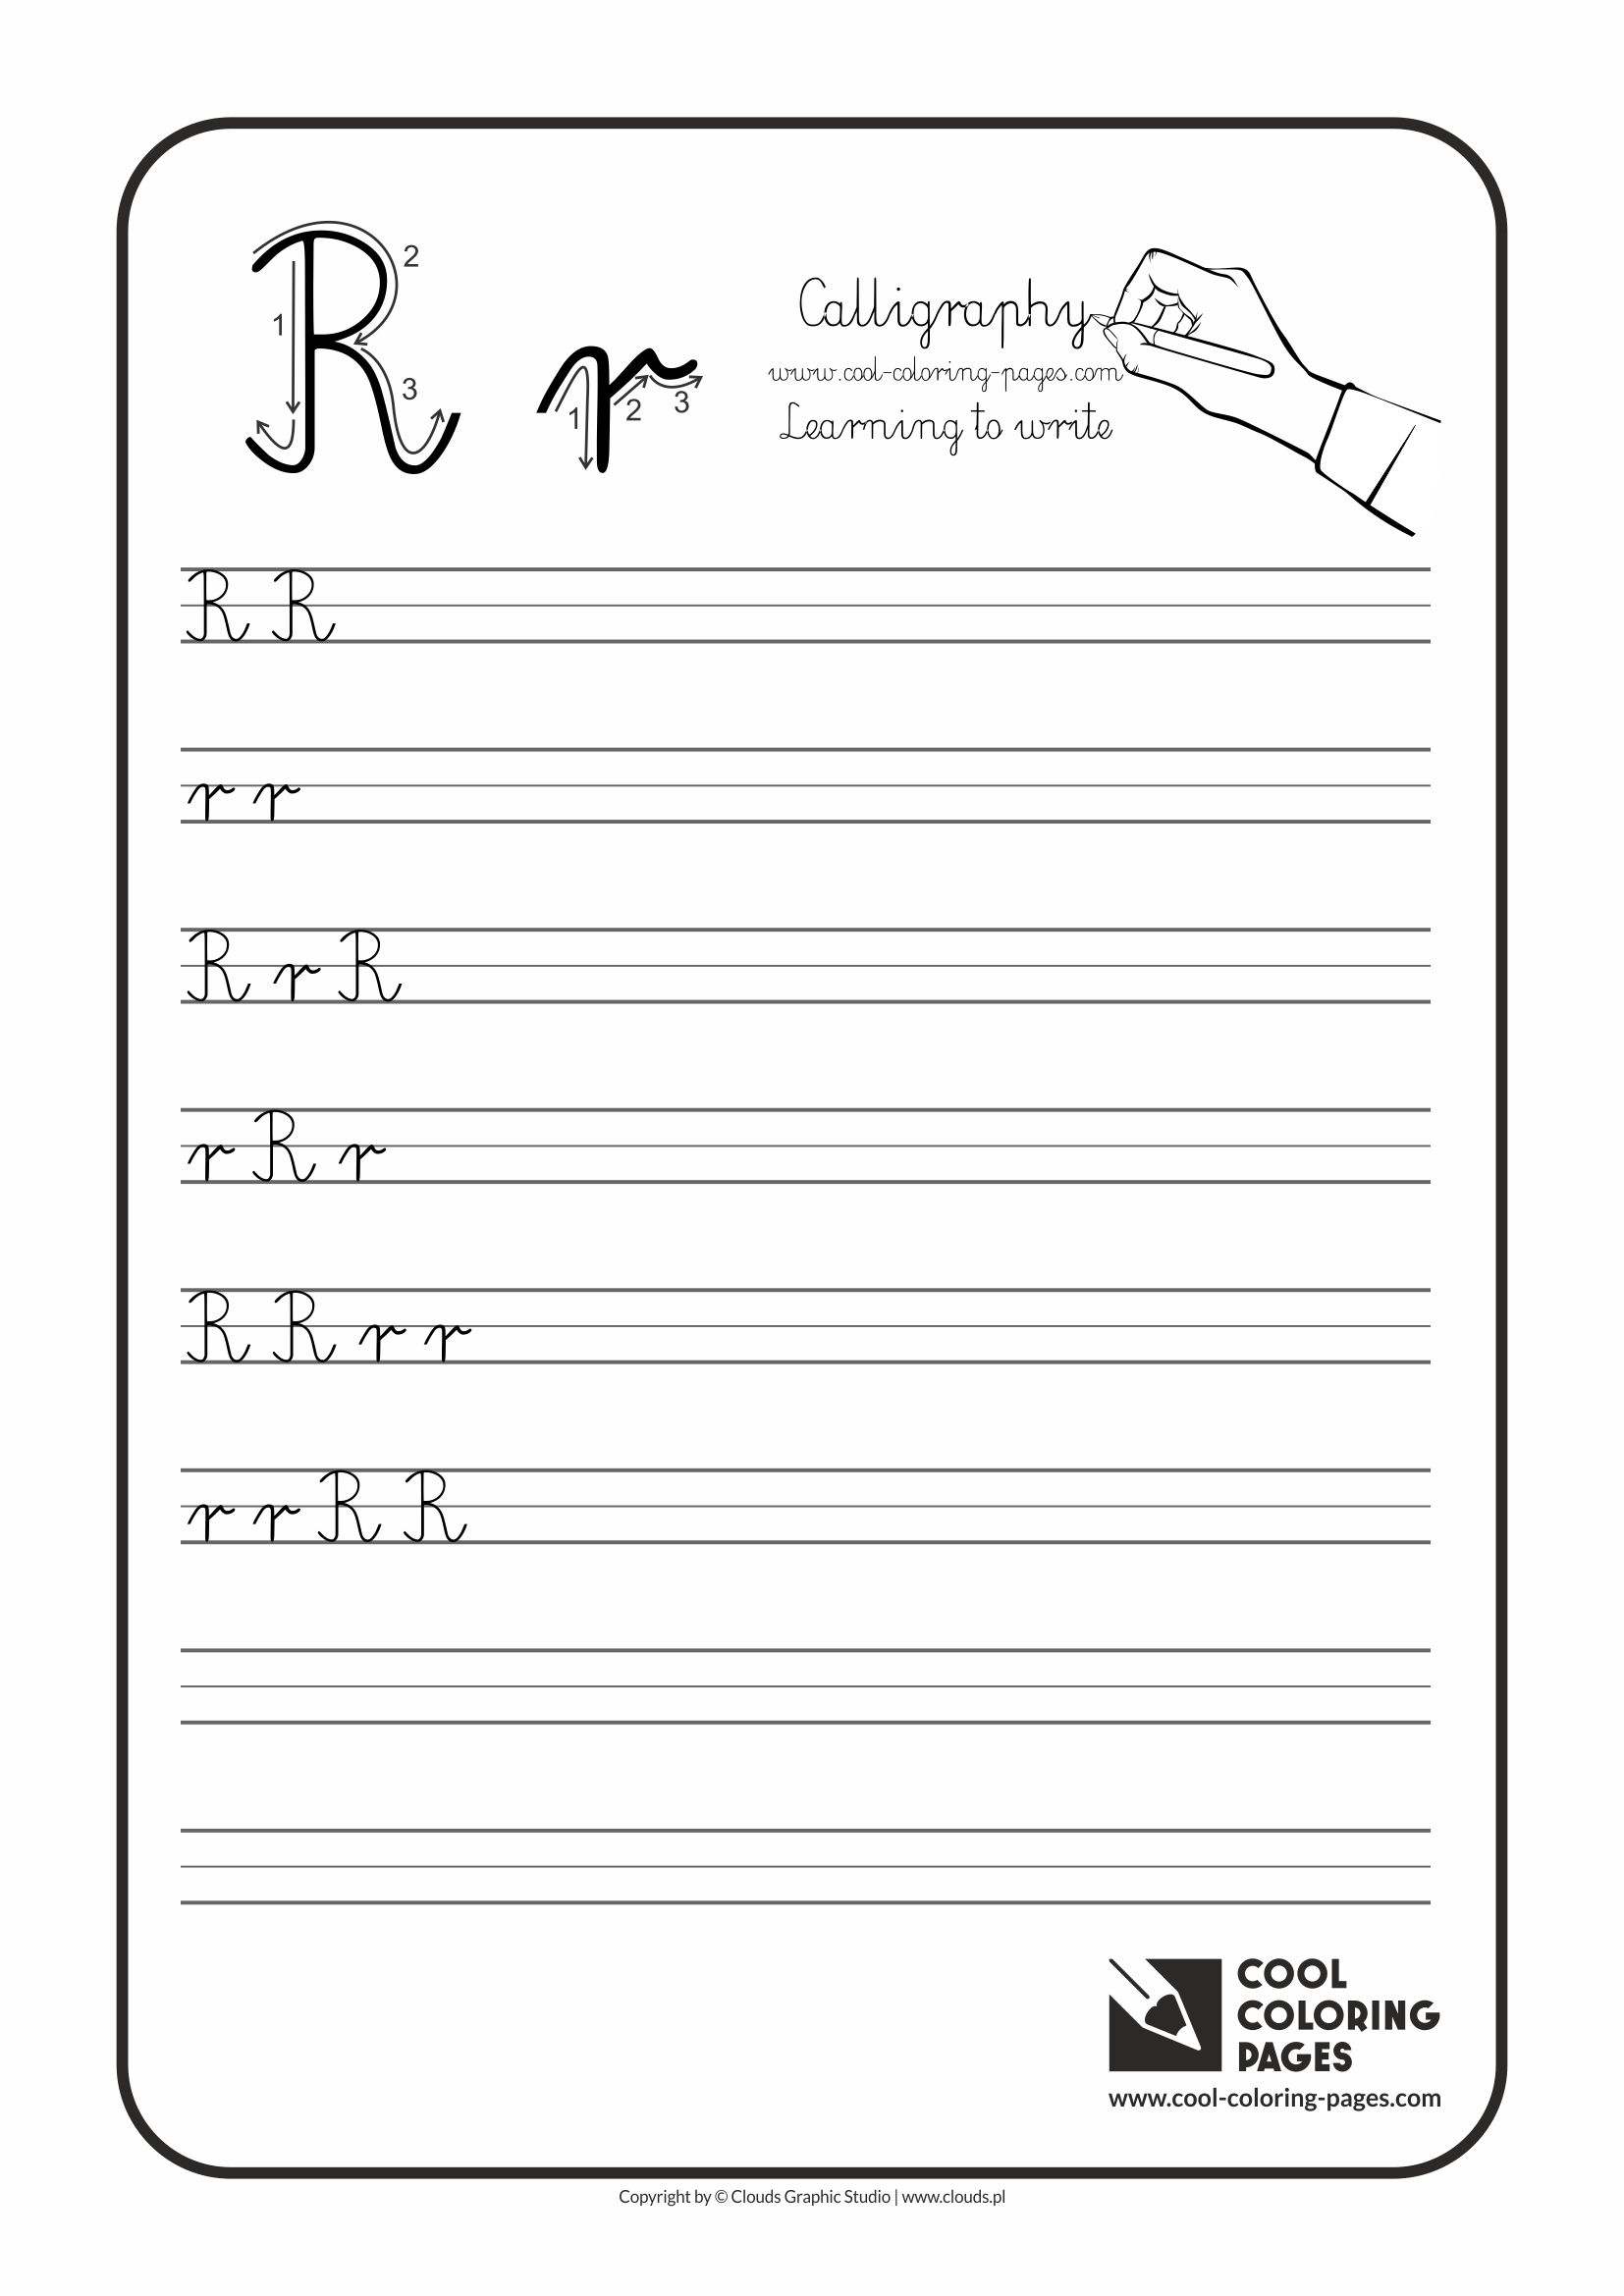 Cool Coloring Pages / Calligraphy / Letter R - Handwriting for kids / Worksheets